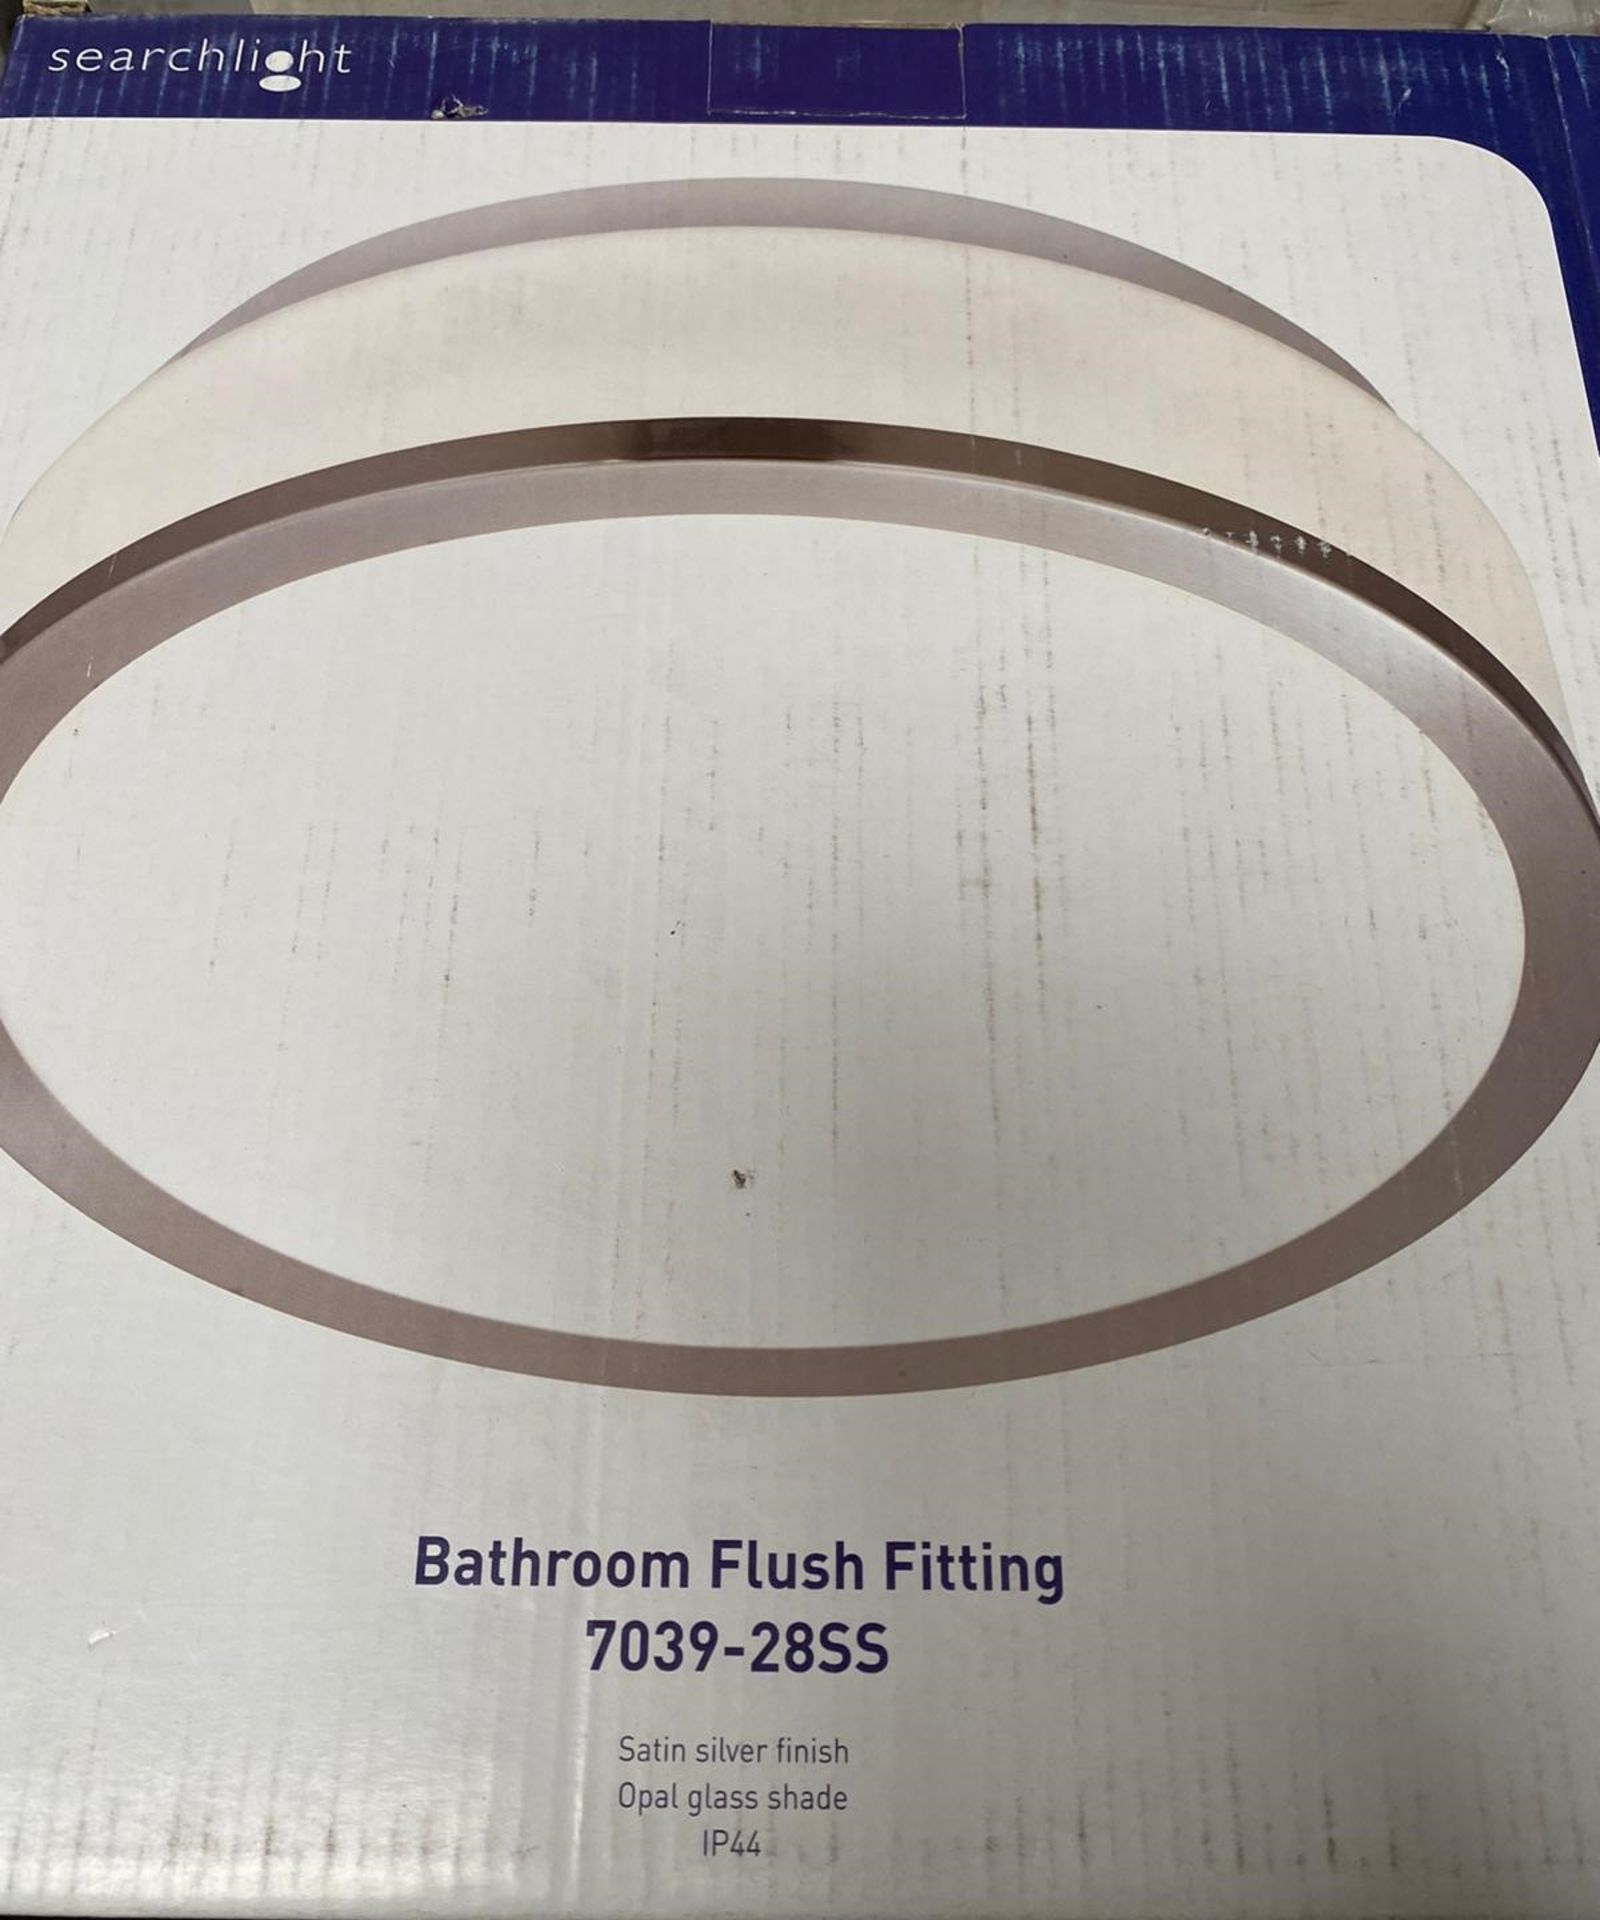 1 x Bathroom Flush fitting in a satin silver finish - Ref: 7039-28SS - New boxed - RRP: £60 (each)